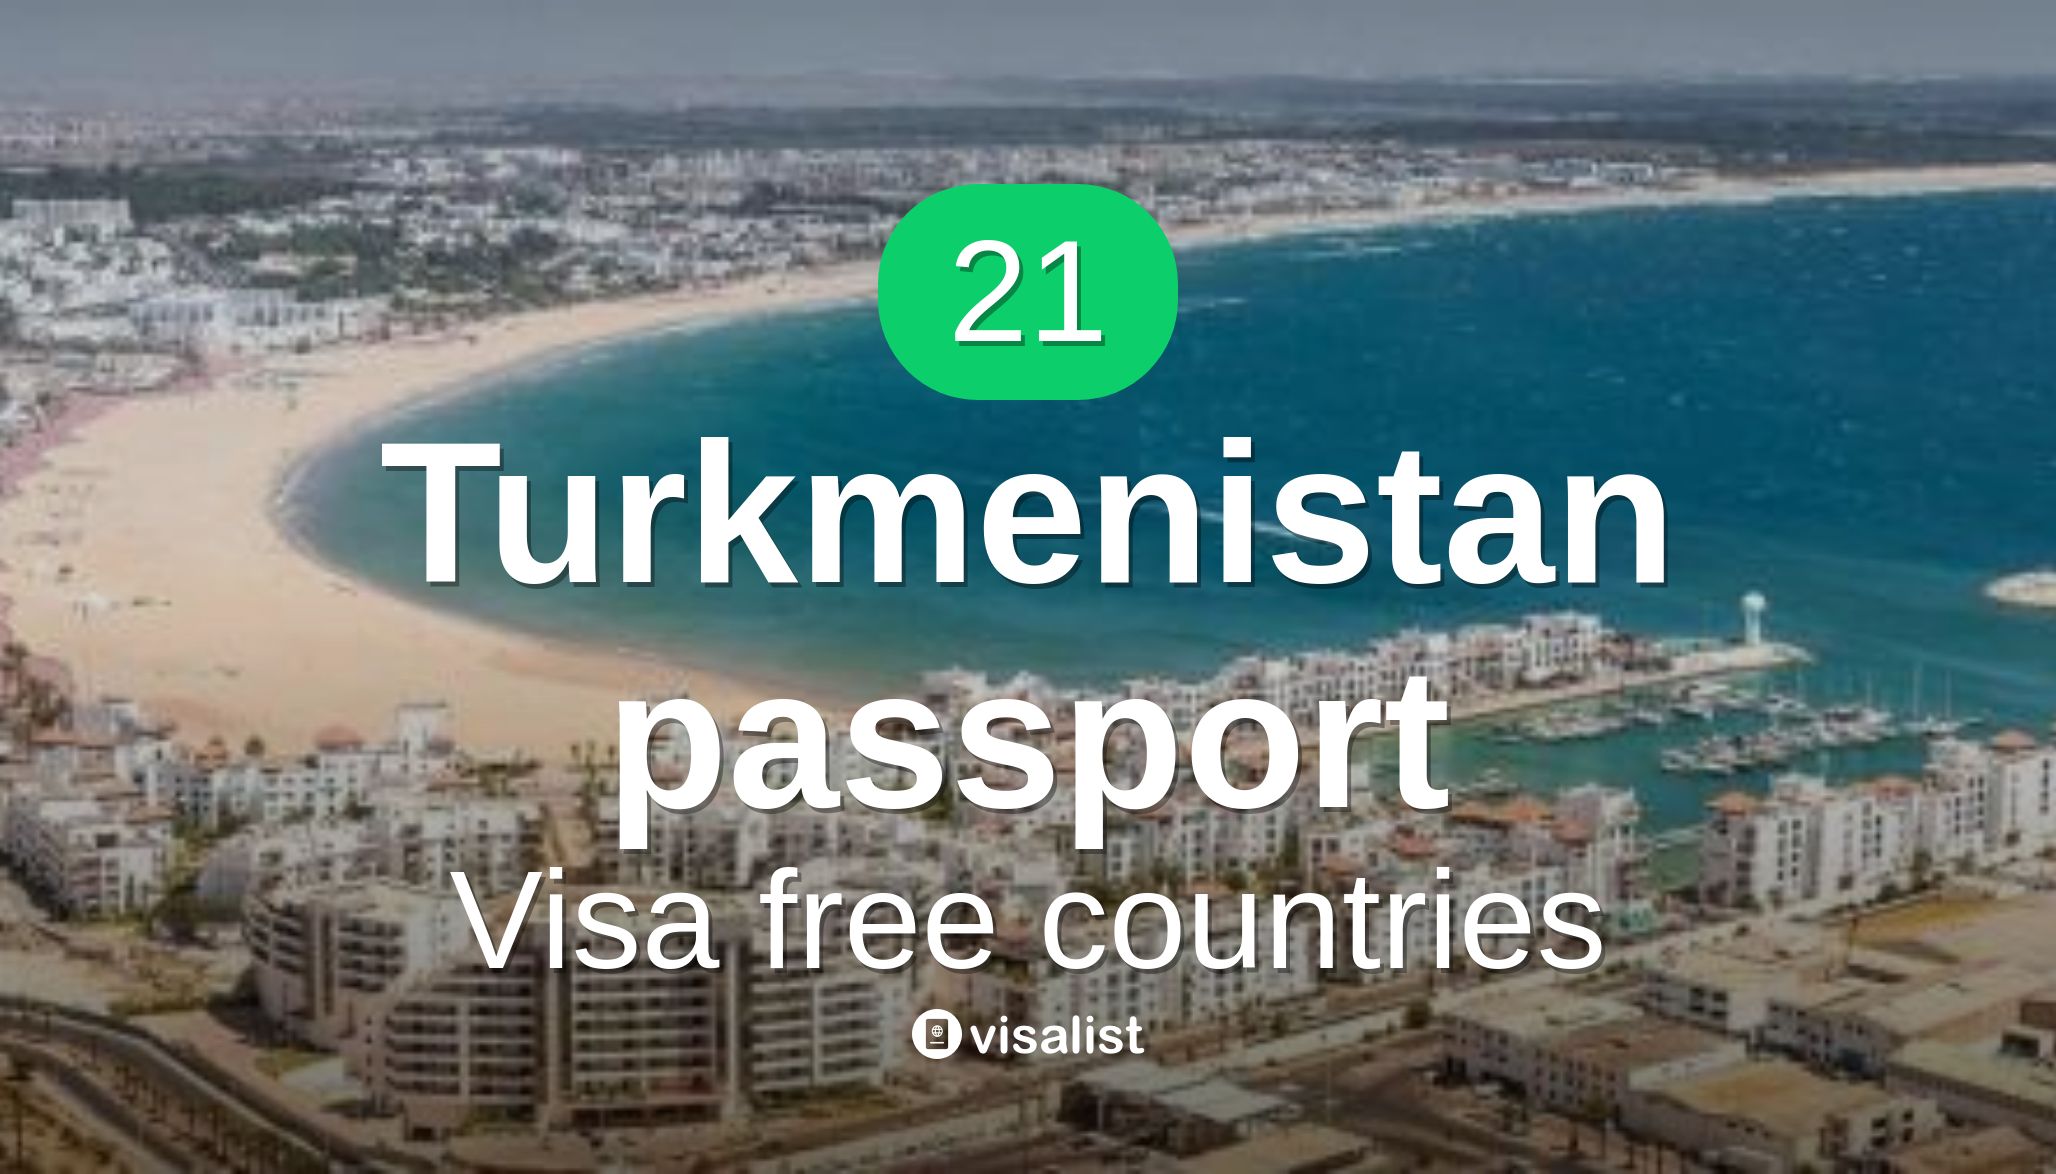 which countries can visit turkmenistan without visa